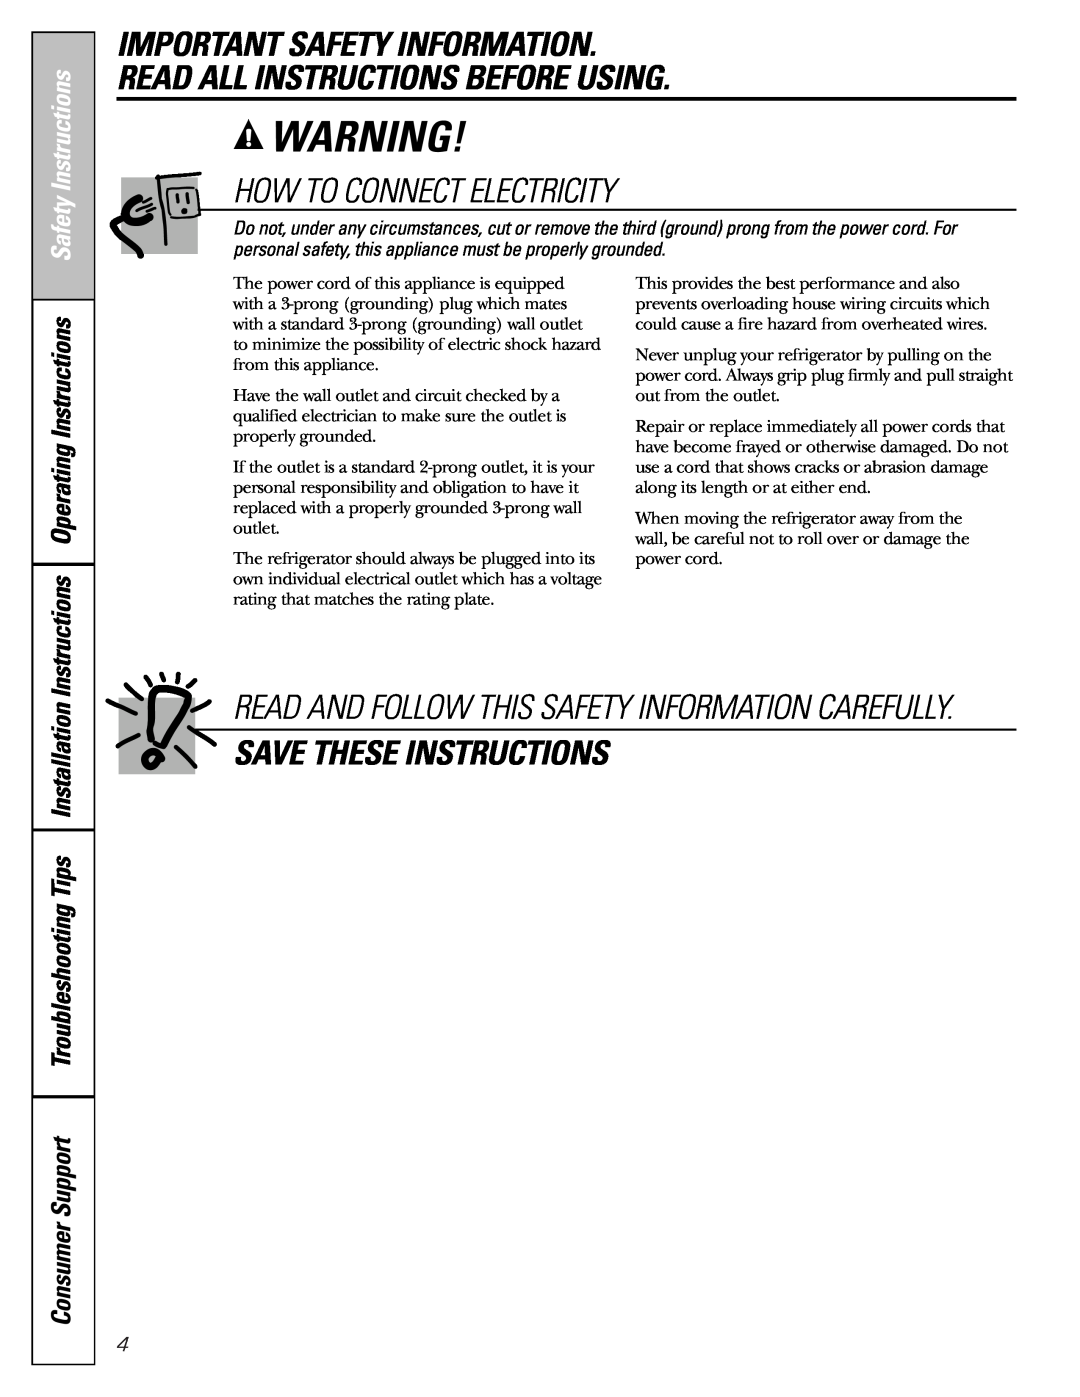 GE 49-60456 How To Connect Electricity, Save These Instructions, Instructions Operating Instructions, Safety Instructions 